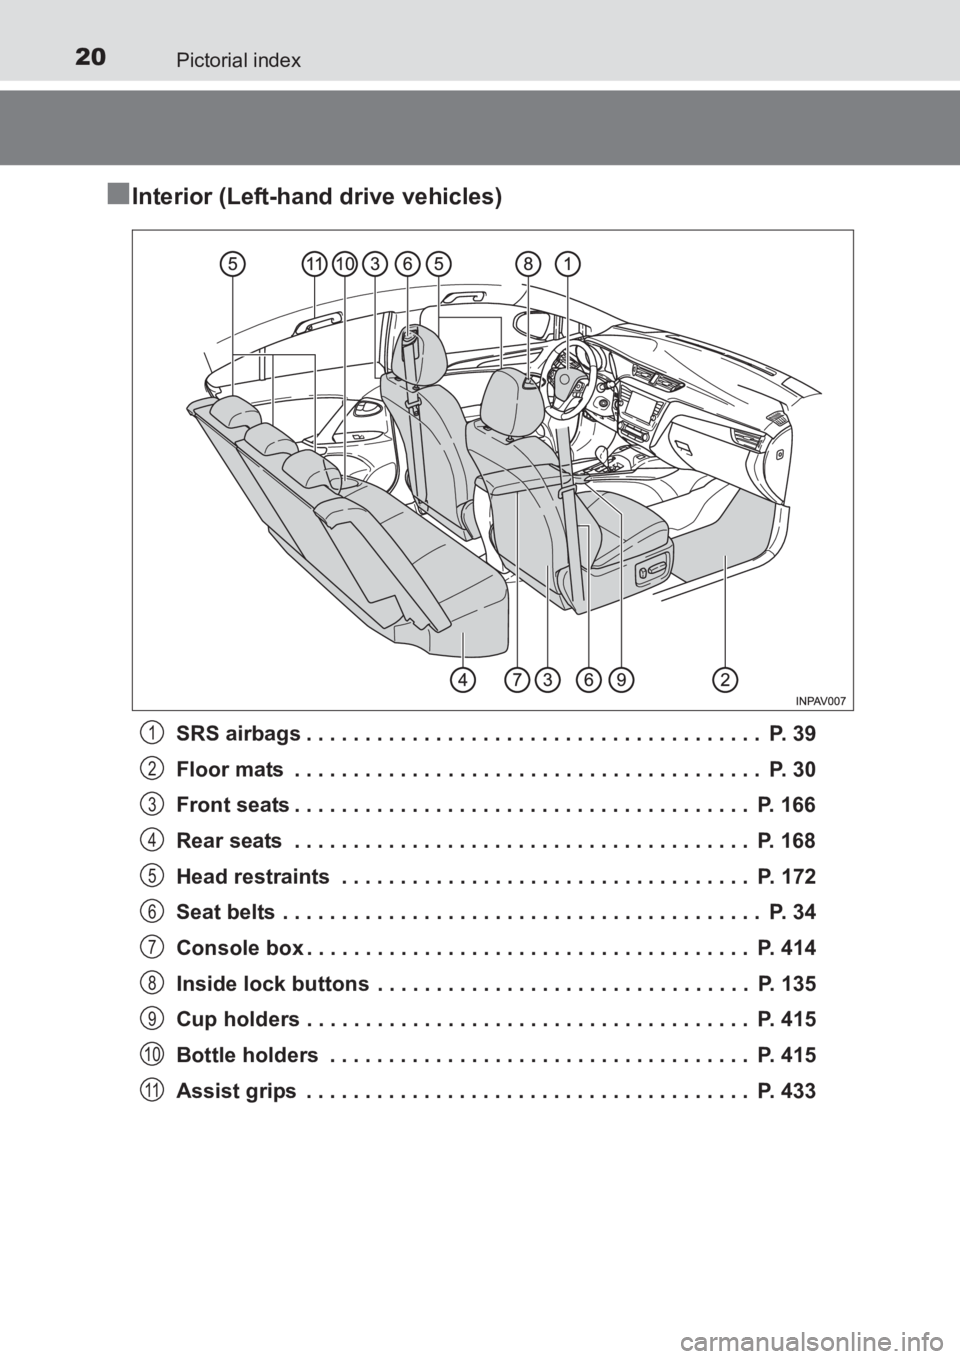 TOYOTA AVENSIS 2017  Owners Manual (in English) 20Pictorial index
AVENSIS_OM_OM20C66E_(EE)
■Interior (Left-hand drive vehicles)
SRS airbags . . . . . . . . . . . . . . . . . . . . . . . . . . . . . . . . . . . . . . .  P. 39
Floor mats  . . . . .